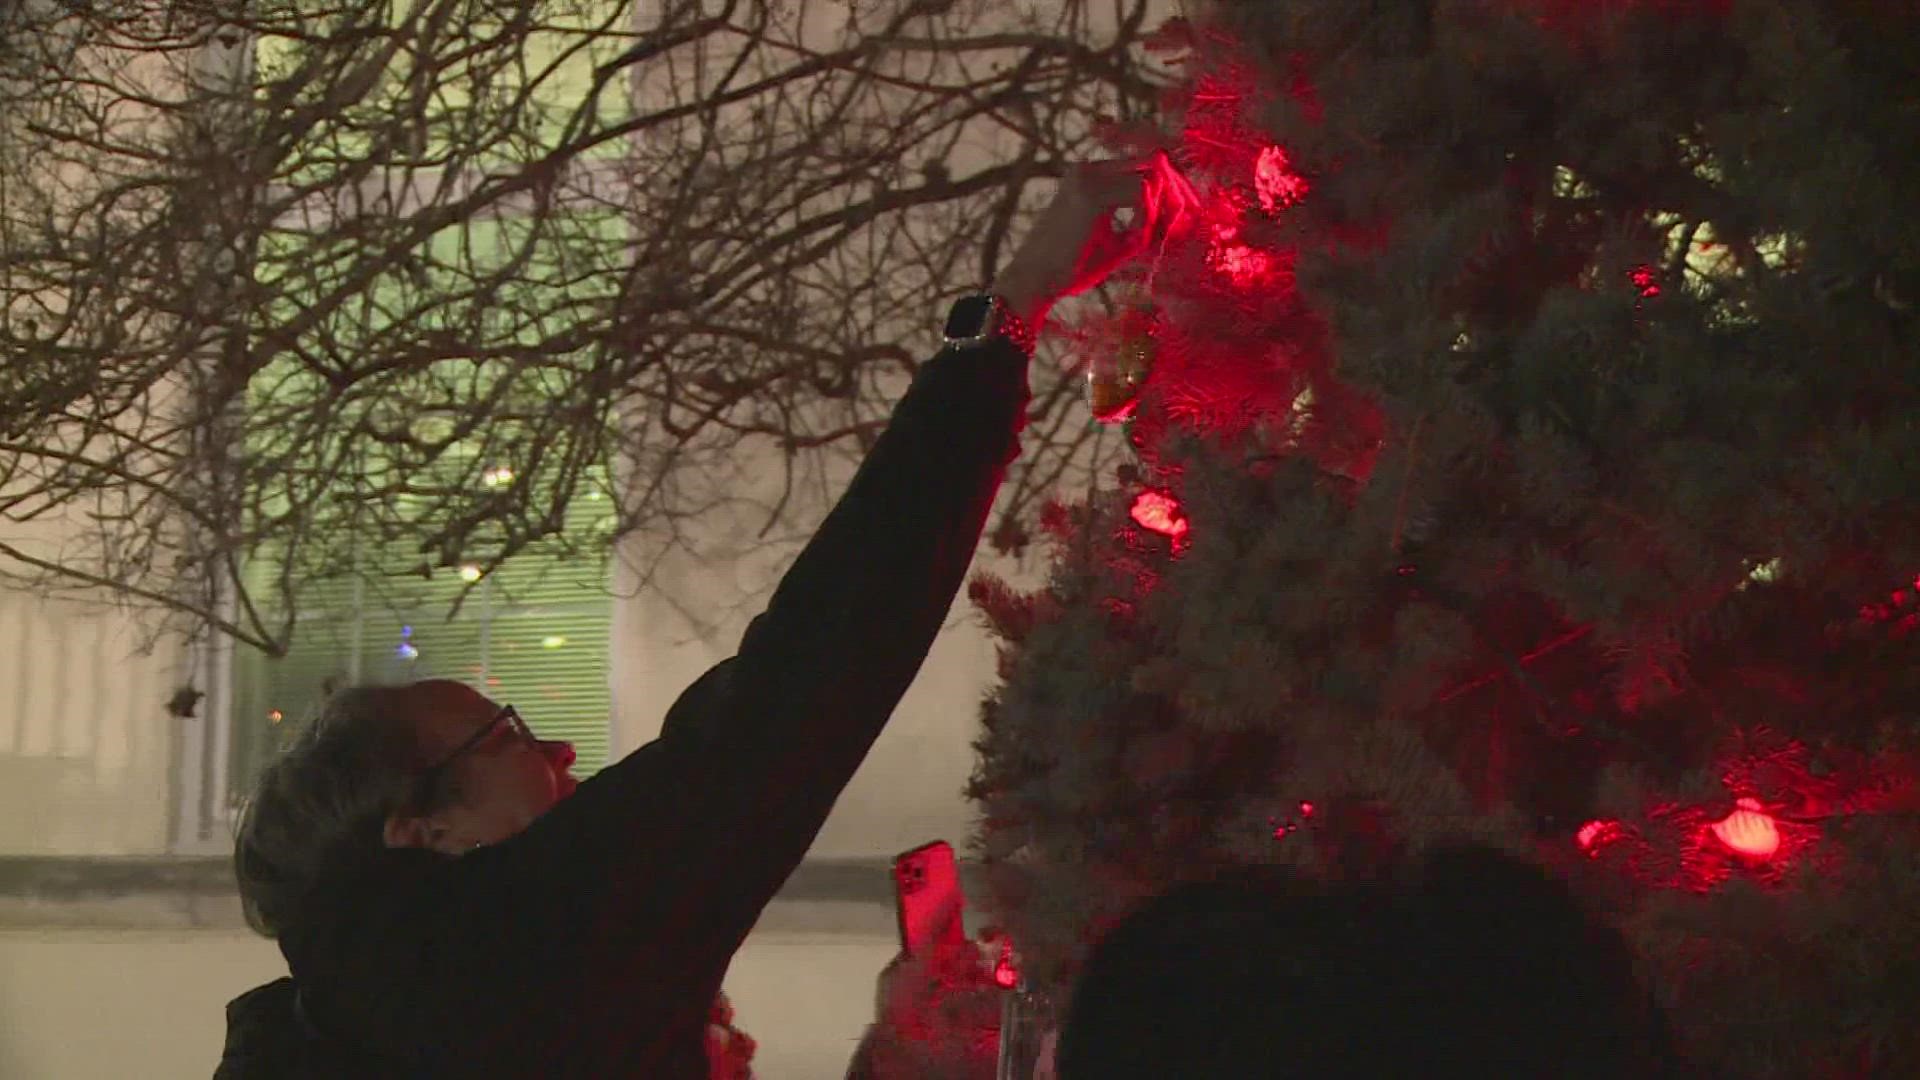 The lighting of the Christmas tree was in honor of lives lost to traffic crashes in the last year.